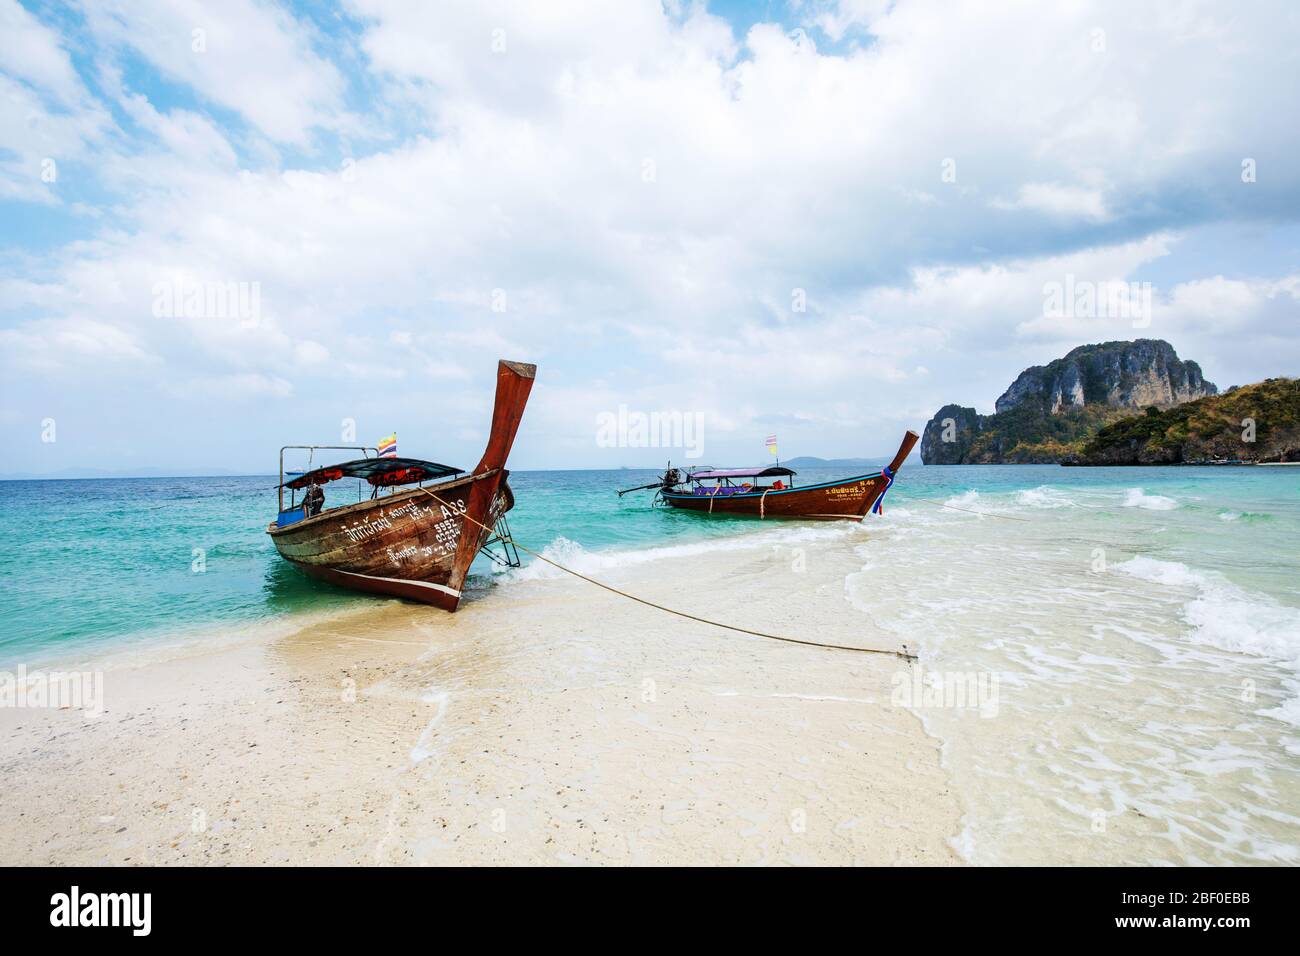 Longtail boat in Tup Island with clear blue waters. Krabi province. Ao Nang, Thailand. Stock Photo